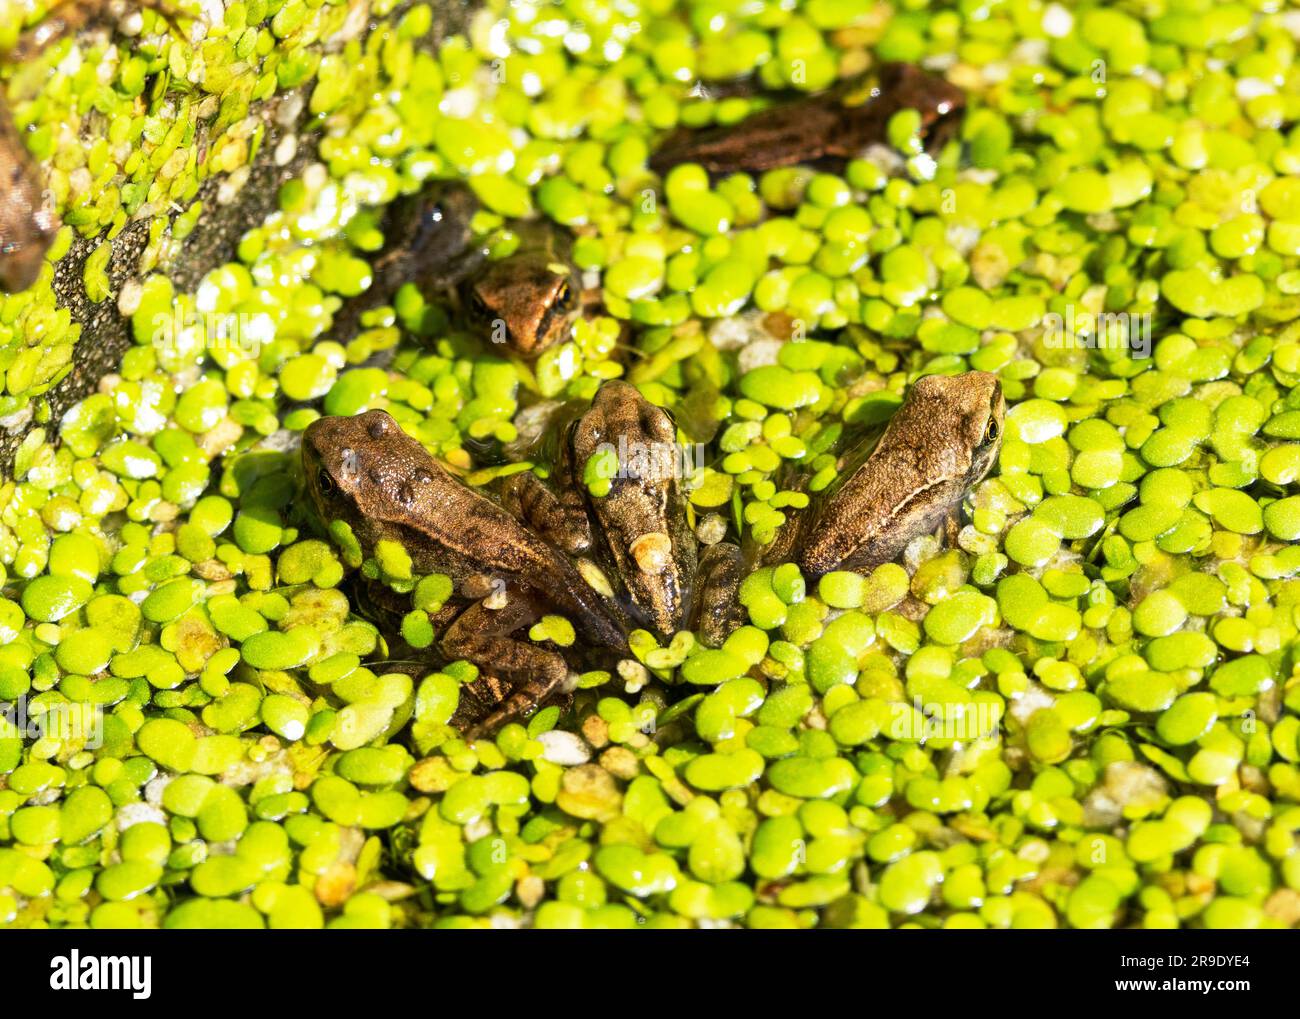 At the end of spring tiny froglets start to emerge from ponds. They have completed the process of metamorphosis and can now breath through their skin. Stock Photo